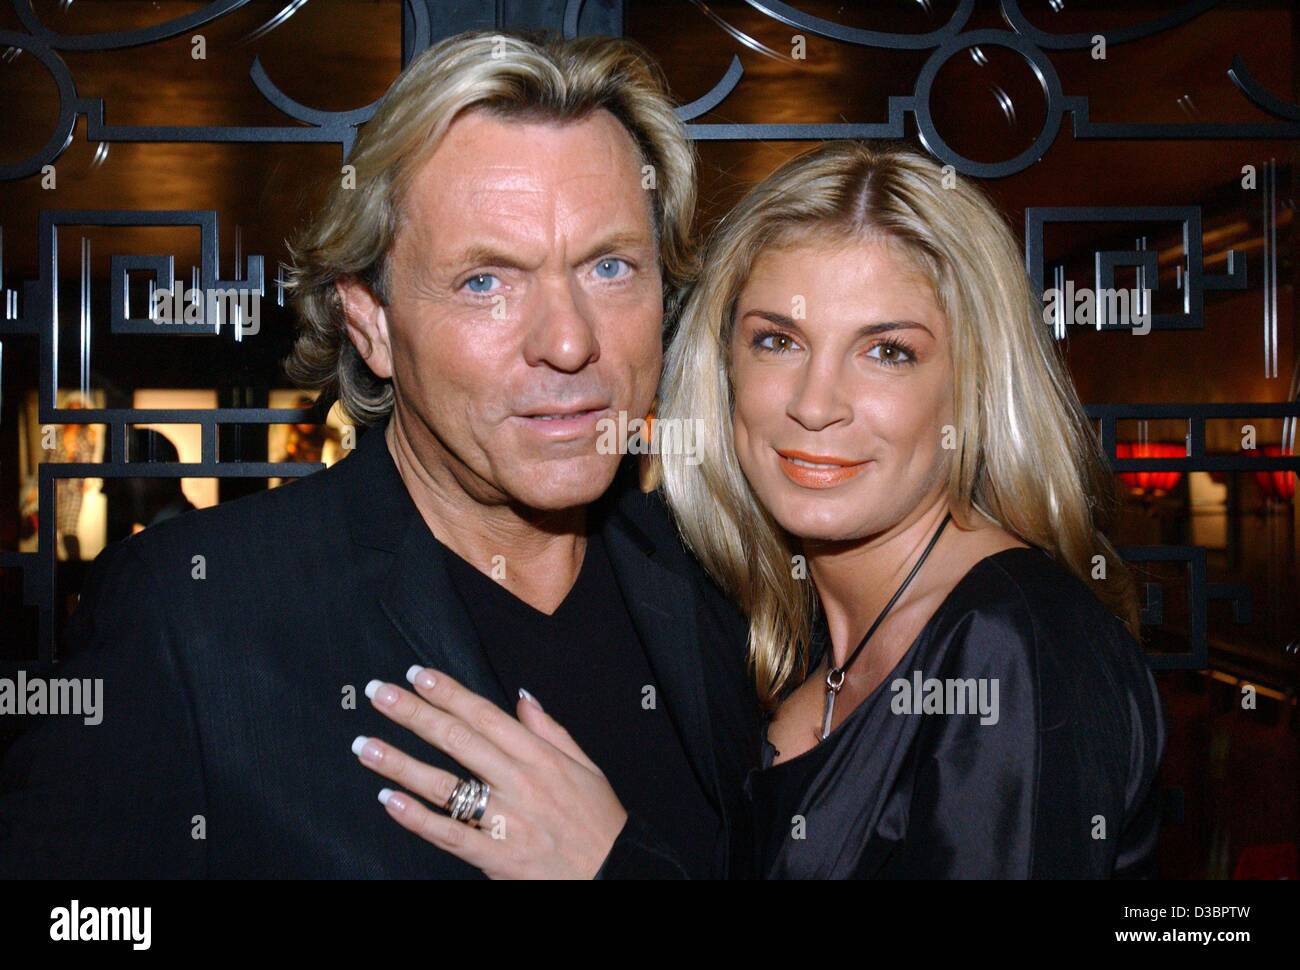 (dpa files) - Fashion entrepreneur Otto Kern and his wife Dana celebrate with his daughter Liuba-Sophia during the 'Gala VIP-LoungeHamburg' at a restaurant in Hamburg, Germany, 25 October 2004. After a quarrel with a cabdriver 32-year-old Dana Kern had a fatal accident at the autobahn near Guenzberg Stock Photo